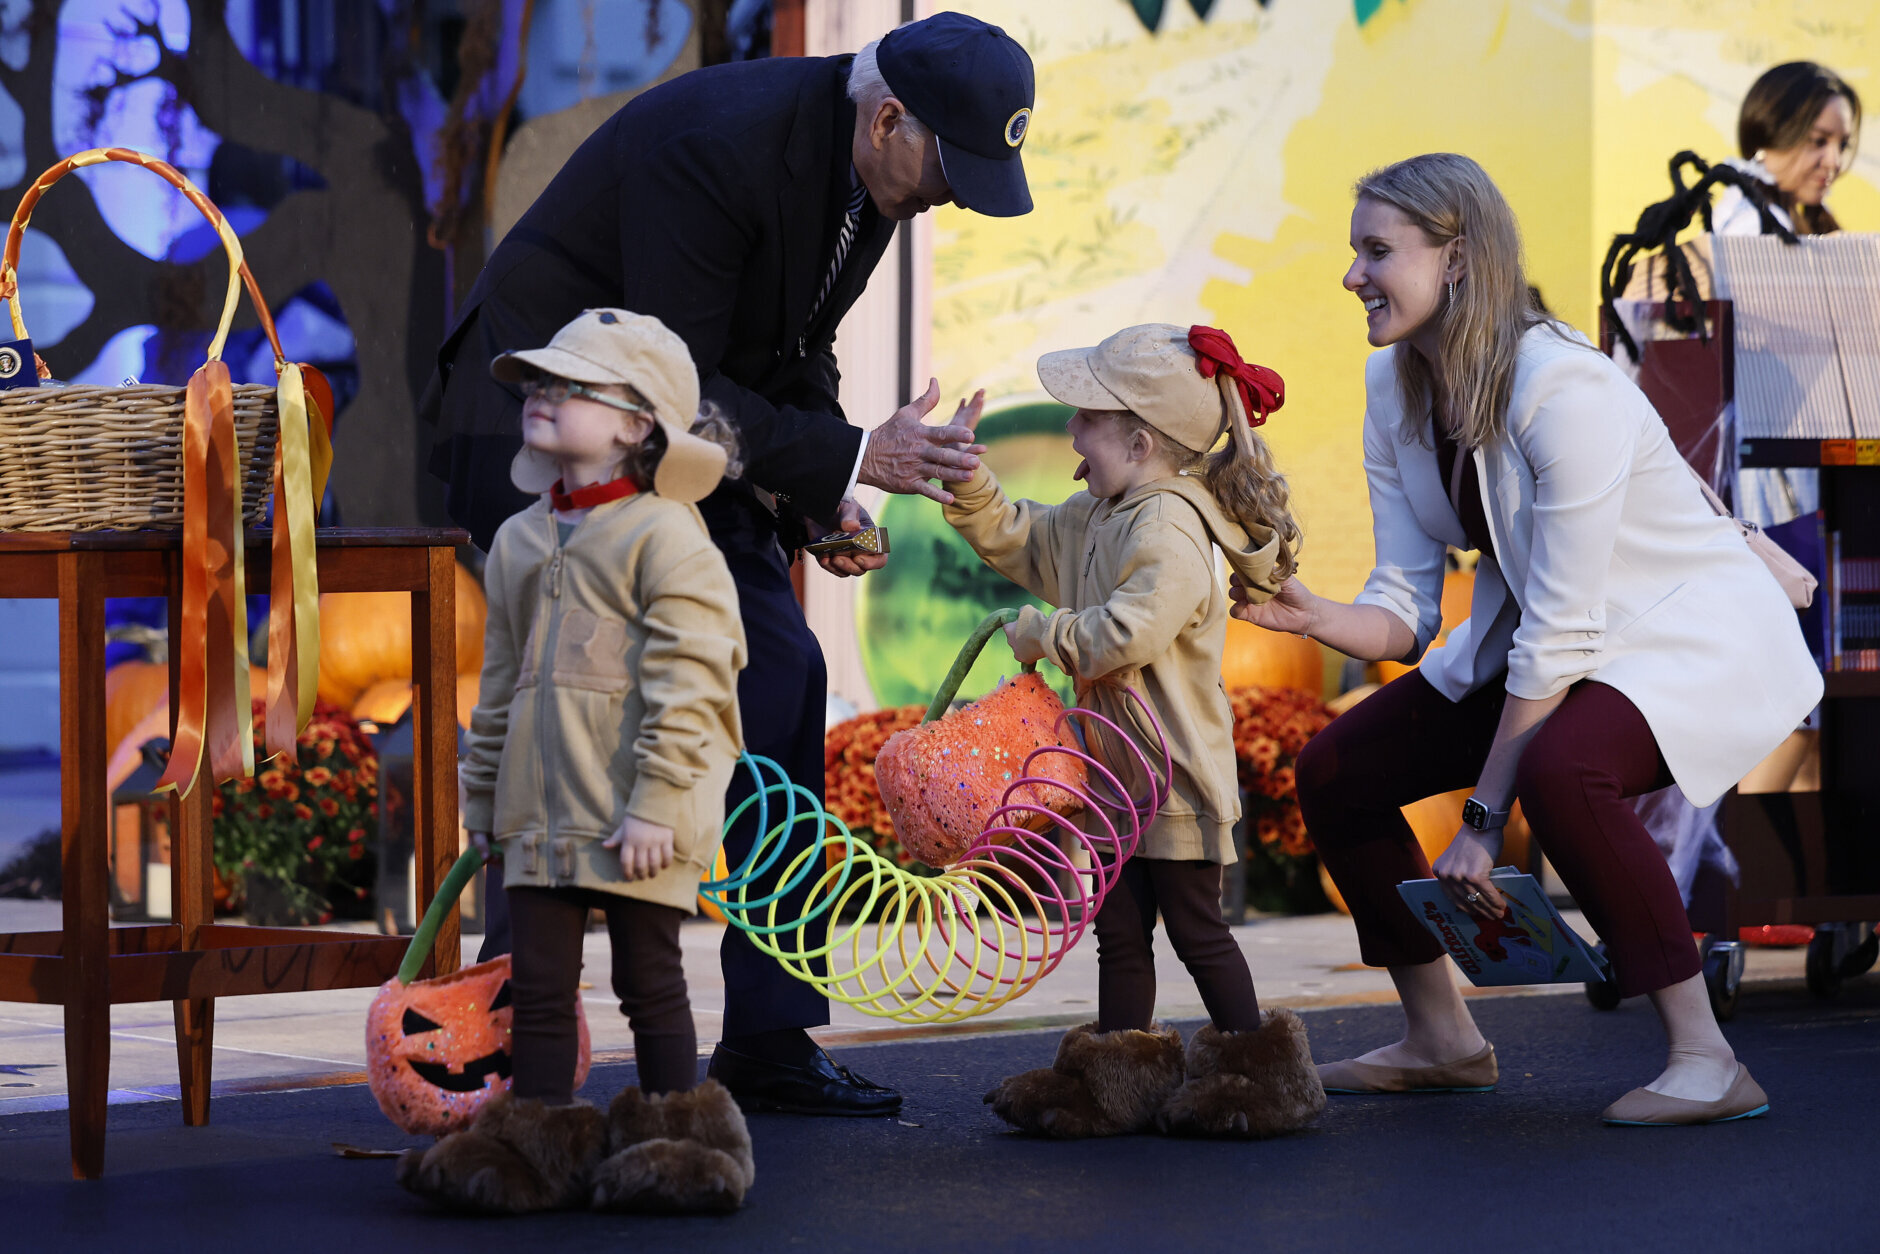 Two small kids have their costumes connected by a large slinky